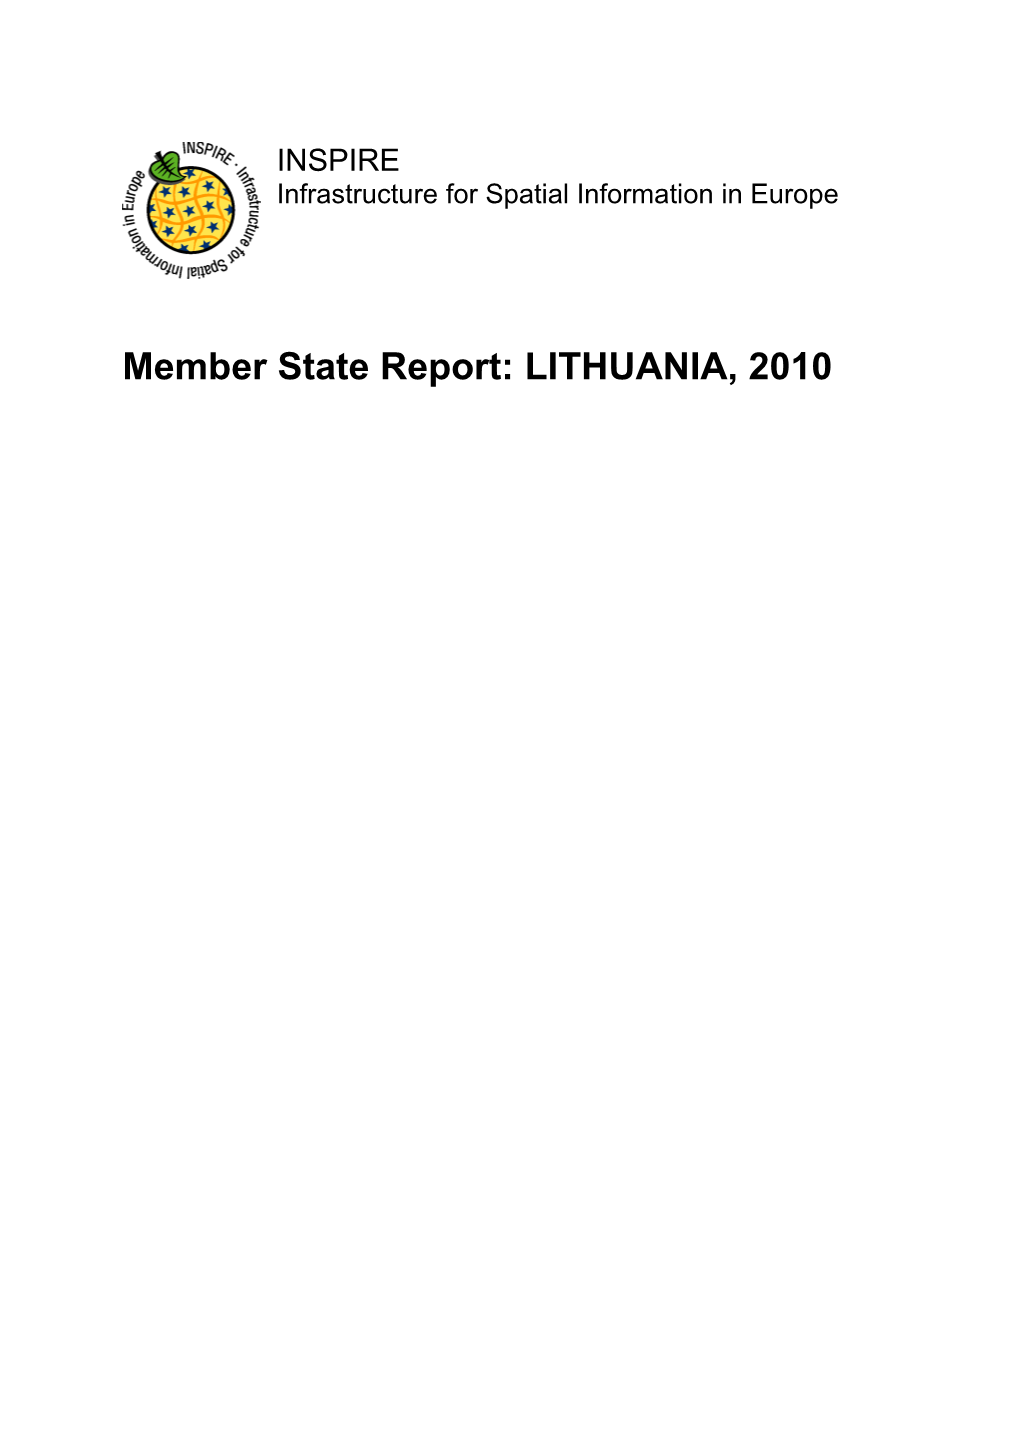 INSPIRE Monitoring Report, Lithuania